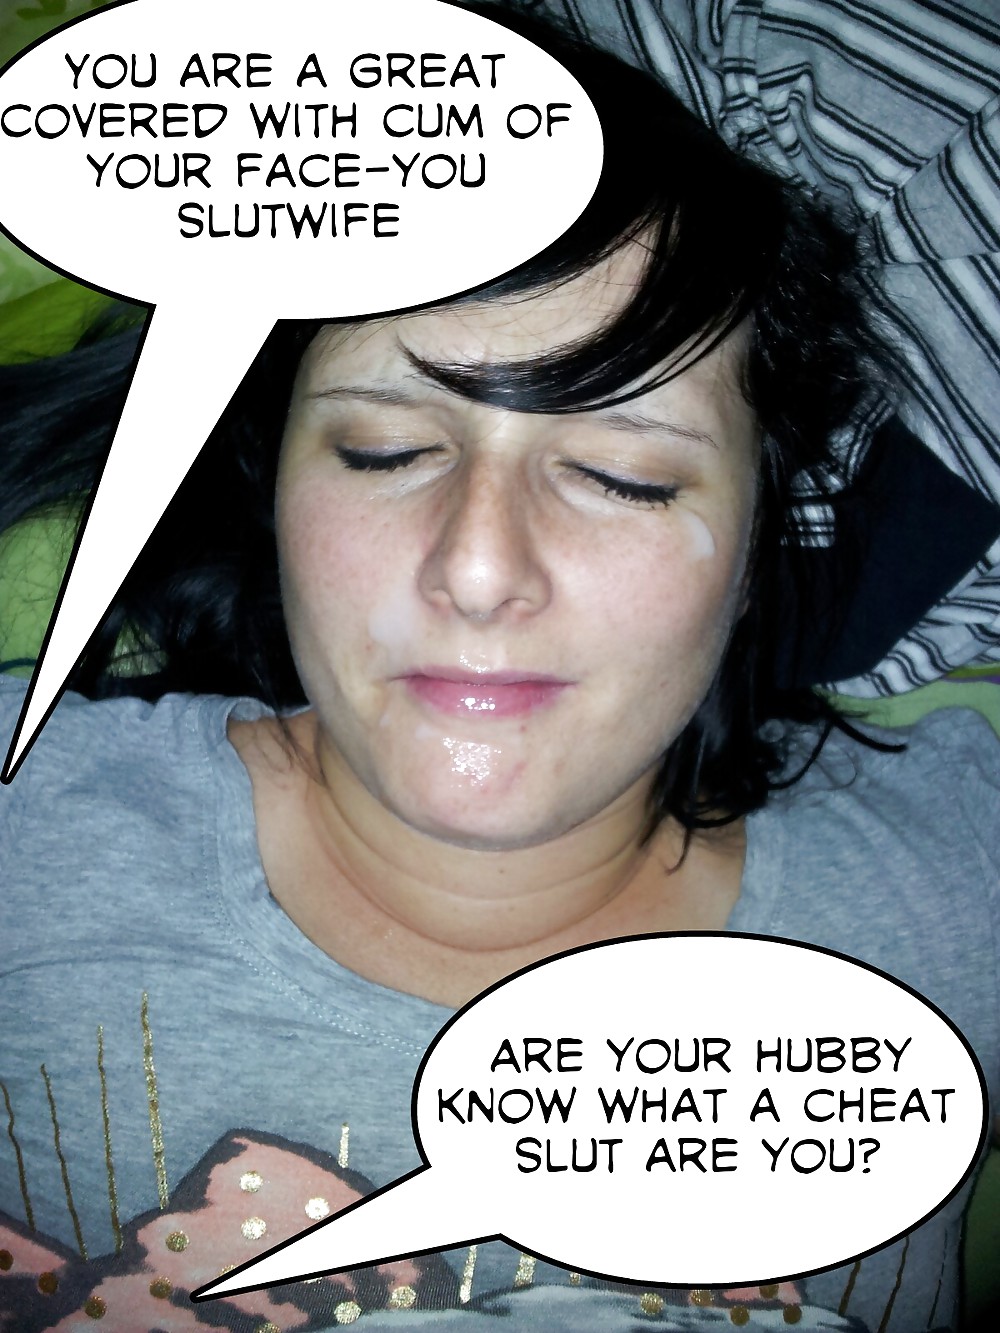 My photostrip story-hubby doesn't know #20129010